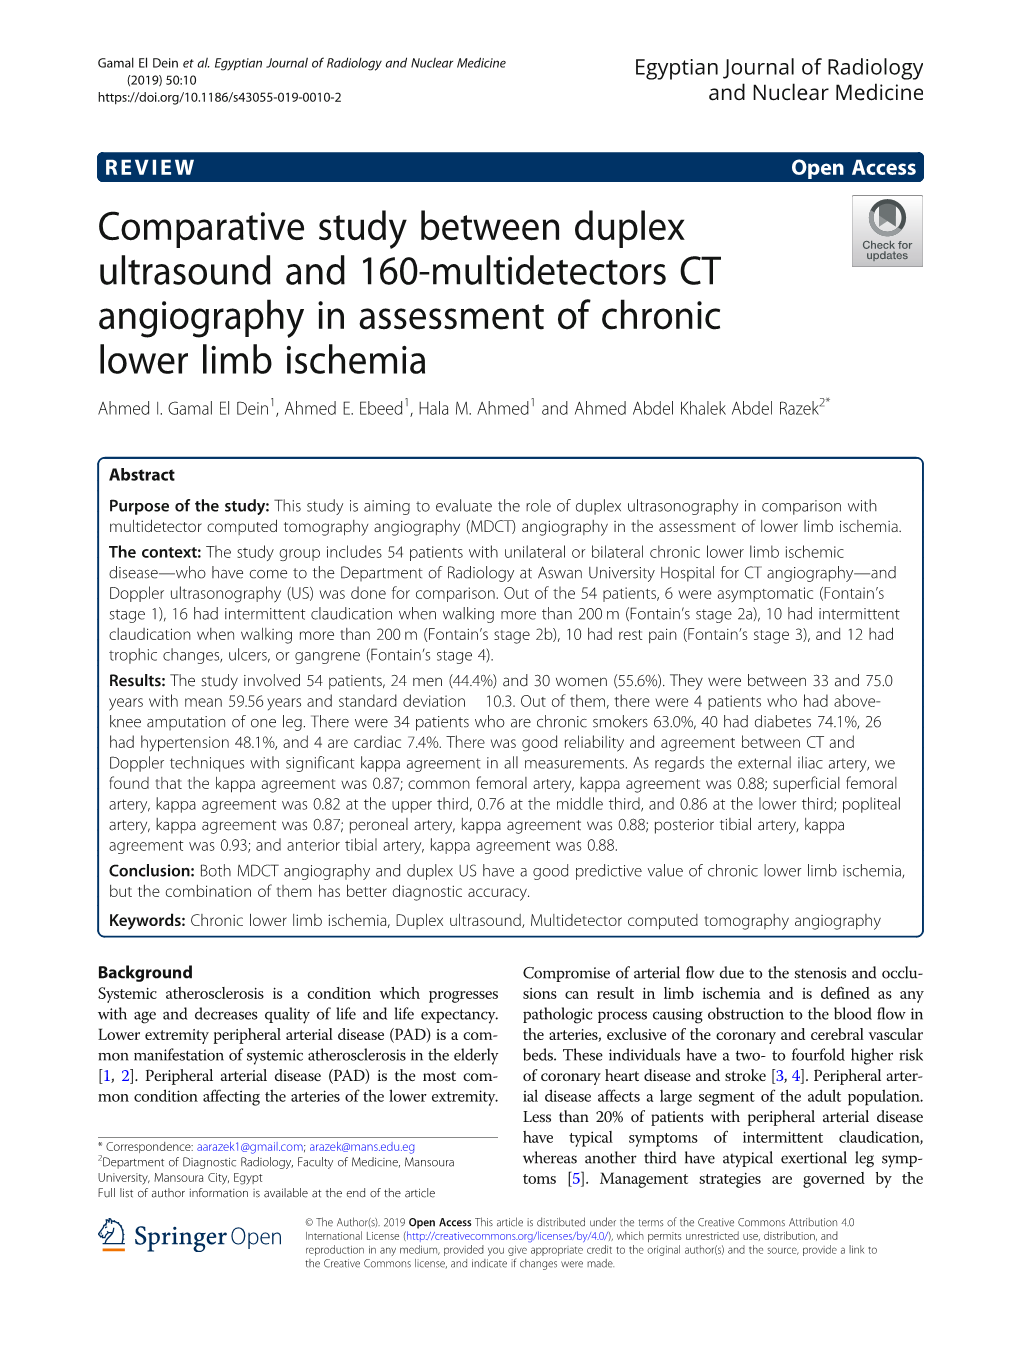 Comparative Study Between Duplex Ultrasound and 160-Multidetectors CT Angiography in Assessment of Chronic Lower Limb Ischemia Ahmed I